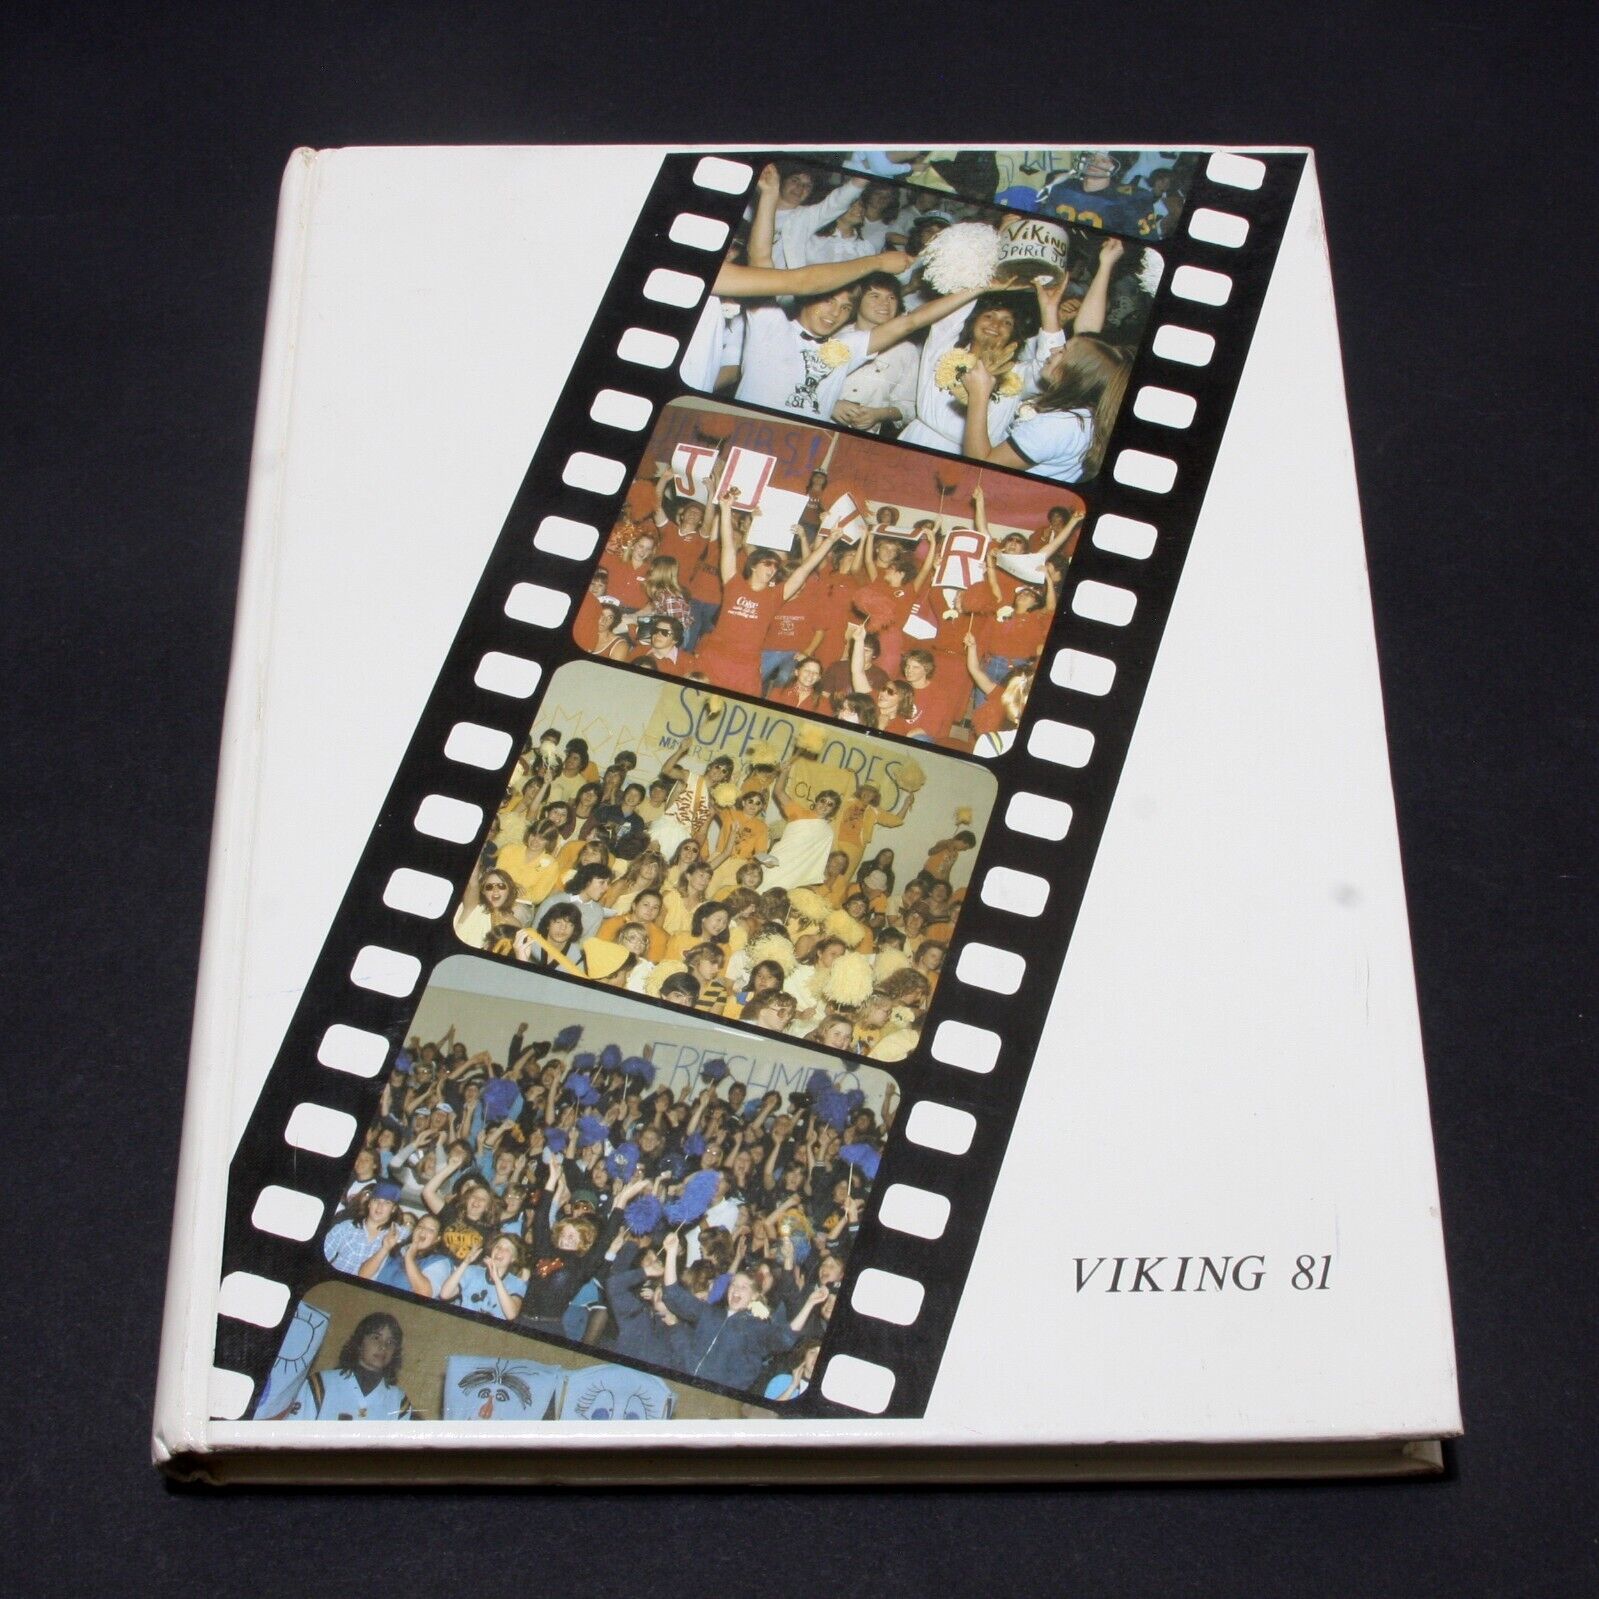 1981 Yearbook Annual Walled Lake Central High School Michigan Viking Volume 57